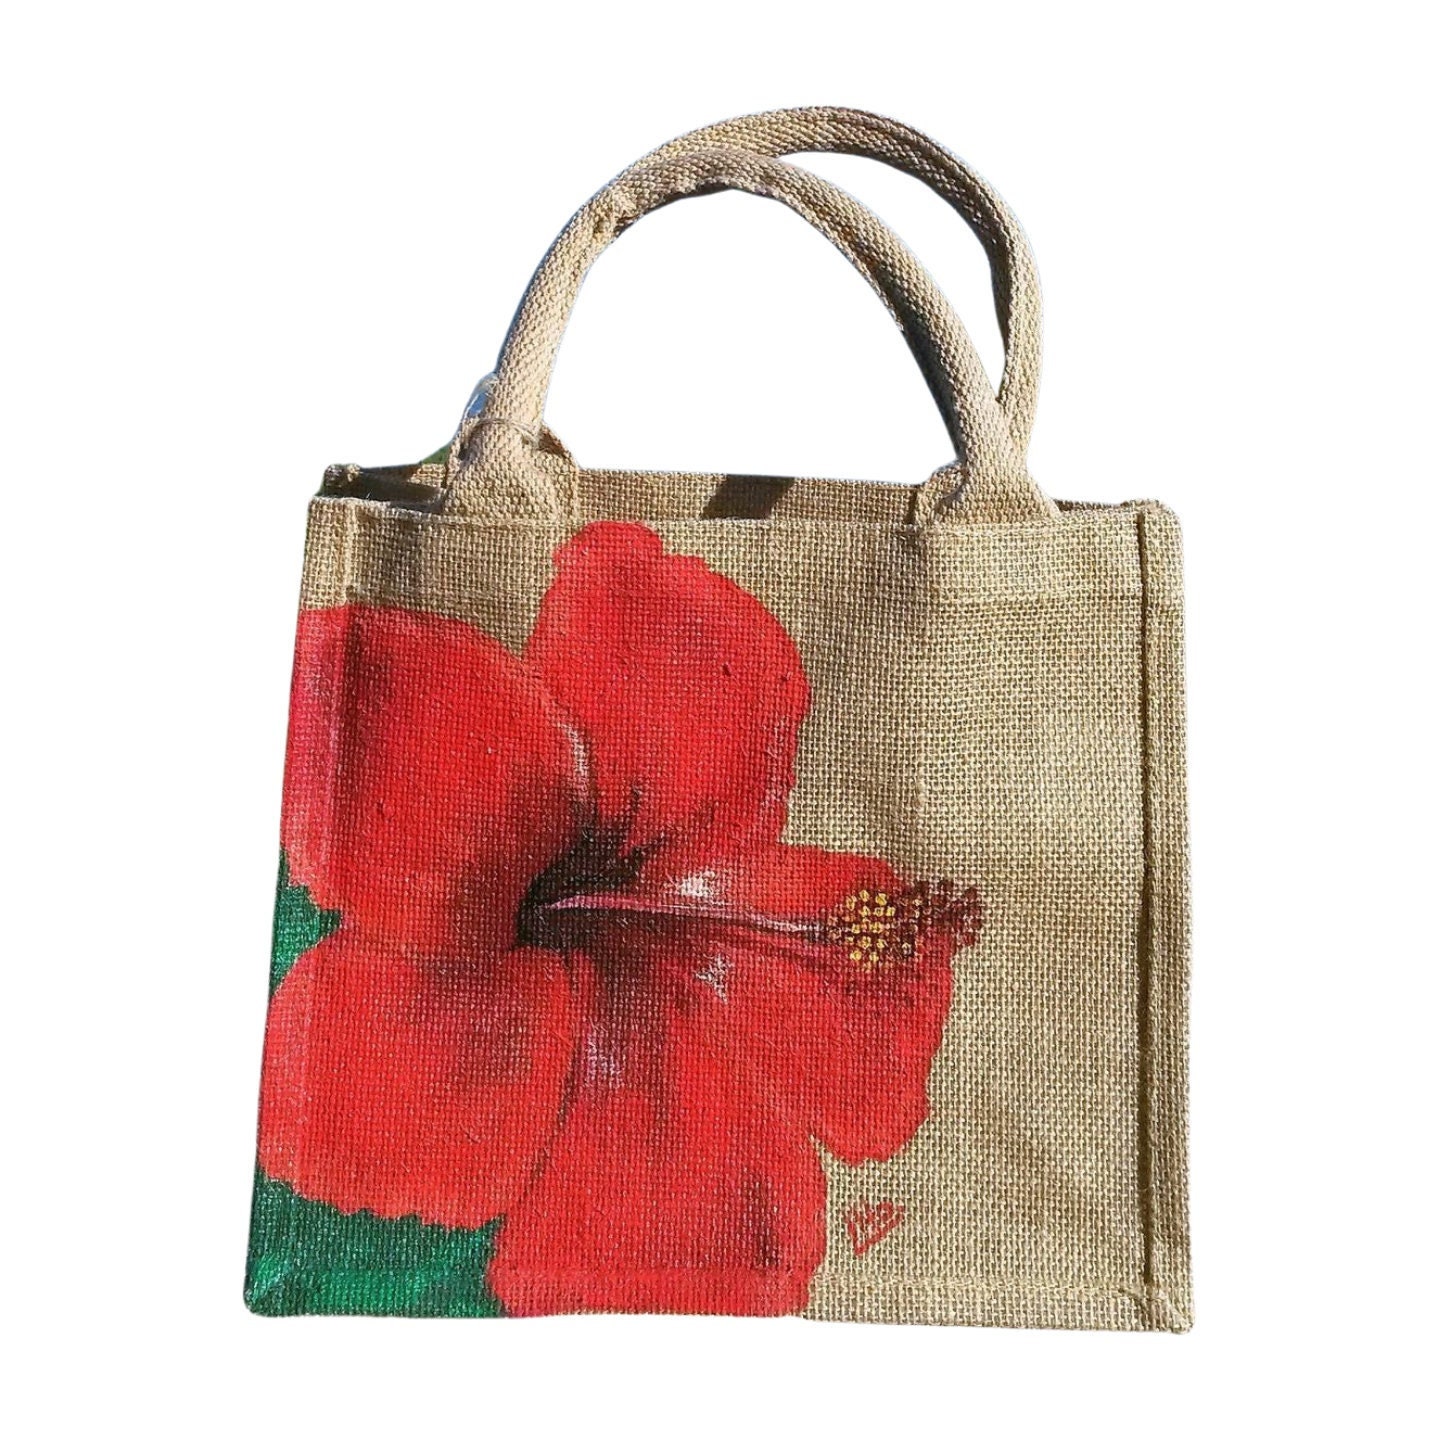 TOTE BAG - MELVILLE - BEIGE & COLORED FLOWERS